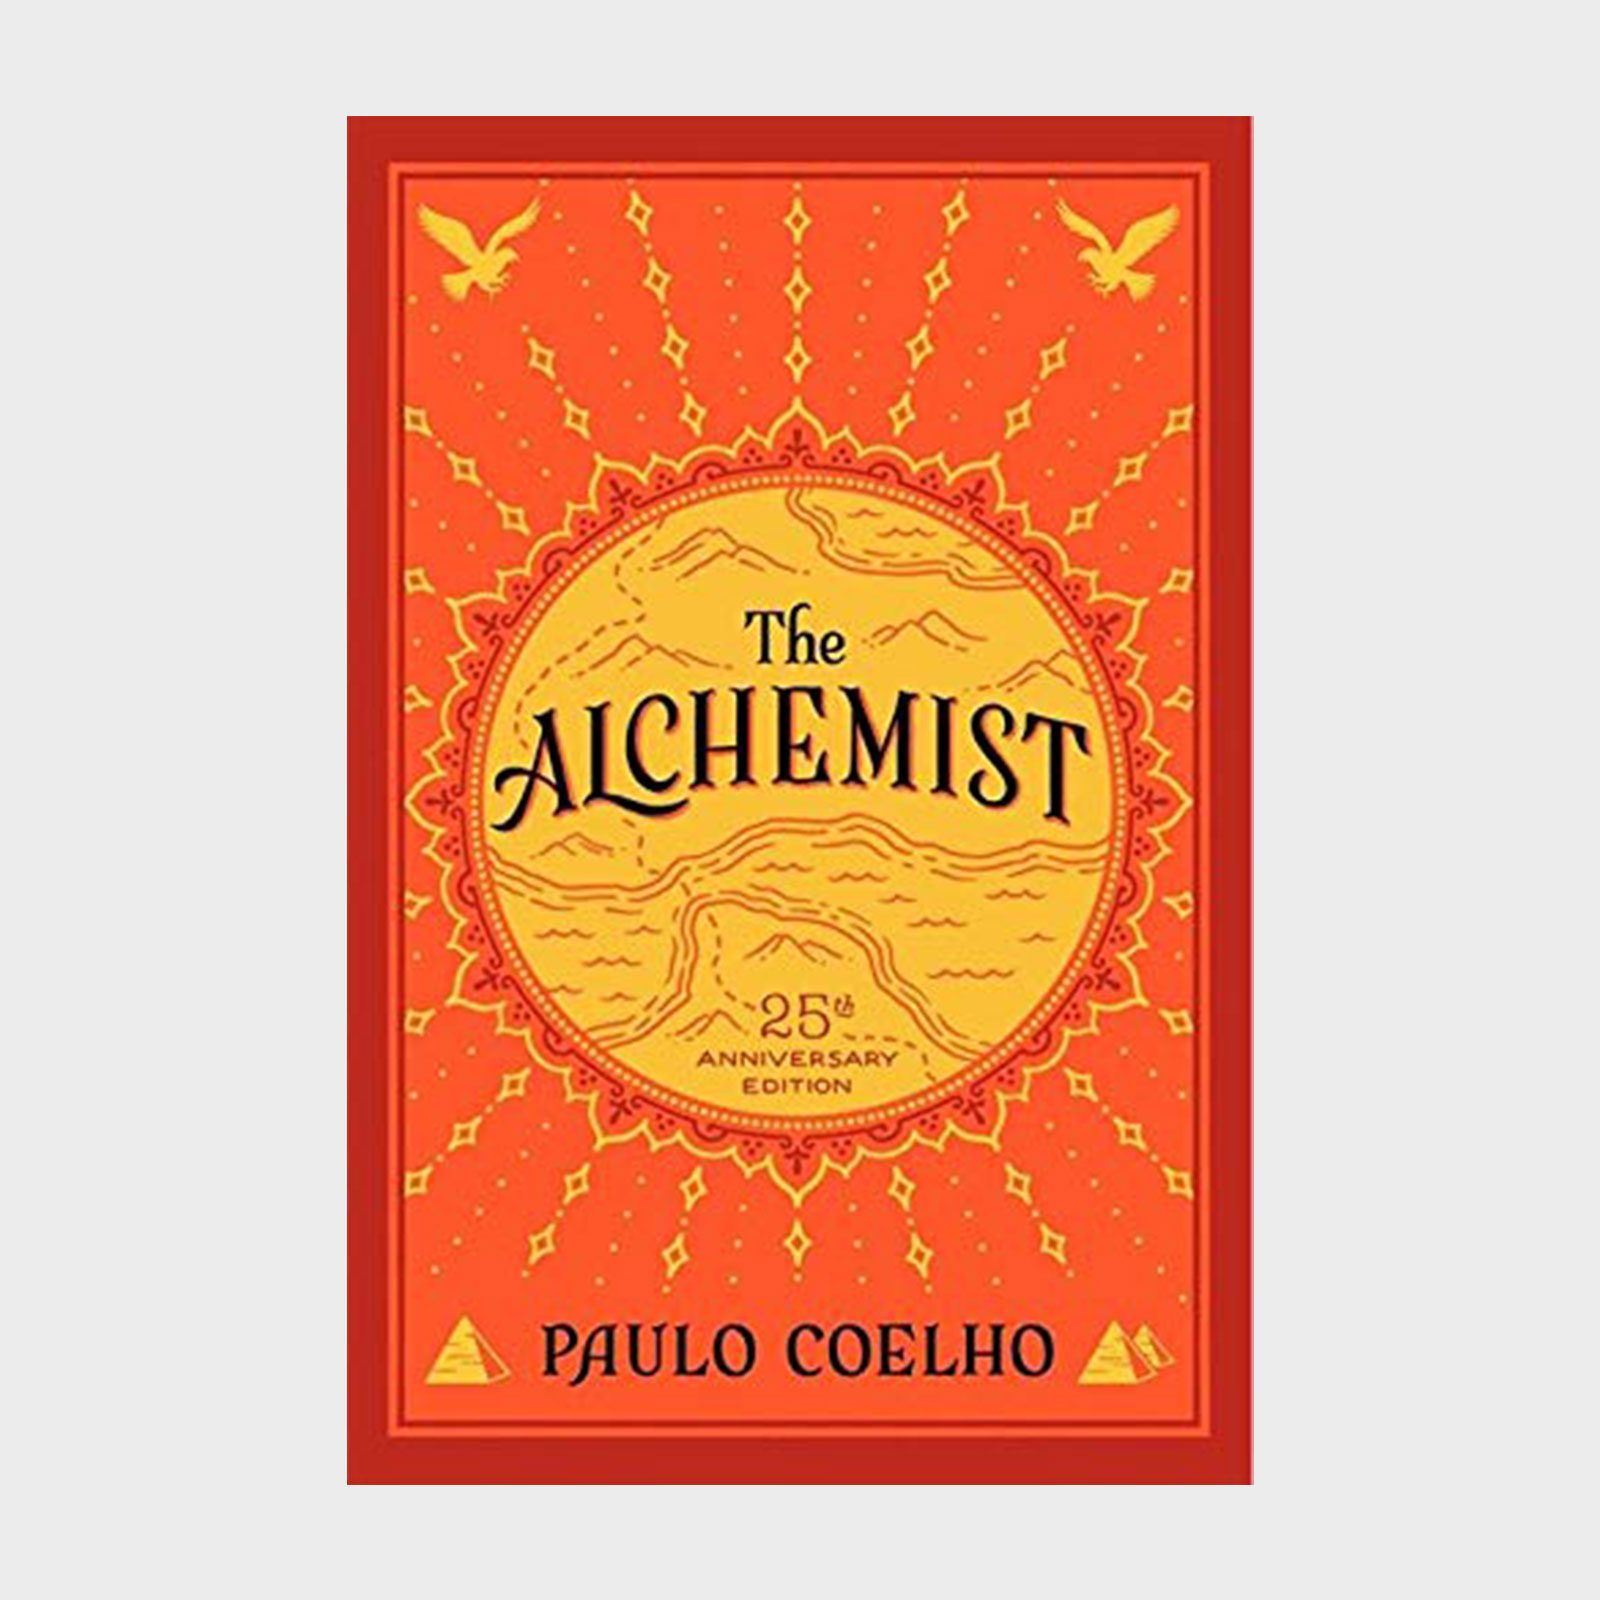 <p>A critically acclaimed <a href="https://www.rd.com/list/classic-books/" rel="noopener noreferrer">classic novel</a>, Paulo Coelho's 1988 <a href="https://www.amazon.com/Alchemist-Paulo-Coelho/dp/0062315005" rel="noopener"><em>The Alchemist</em></a> is packed with wisdom and revelation, empowering anyone on a journey of self-discovery. Readers are swept into the mystical world of a shepherd boy named Santiago, who embarks on a quest in search of worldly treasure only to find his riches in the people he meets and insights he grasps along the way. If you've ever questioned whether you're on the right path or if you've lost sight of what you want in life, Santiago's story may inspire you to rediscover your own spiritual connection.</p> <p class="listicle-page__cta-button-shop"><a class="shop-btn" href="https://www.amazon.com/Alchemist-Paulo-Coelho/dp/0062315005/">Shop Now</a></p>